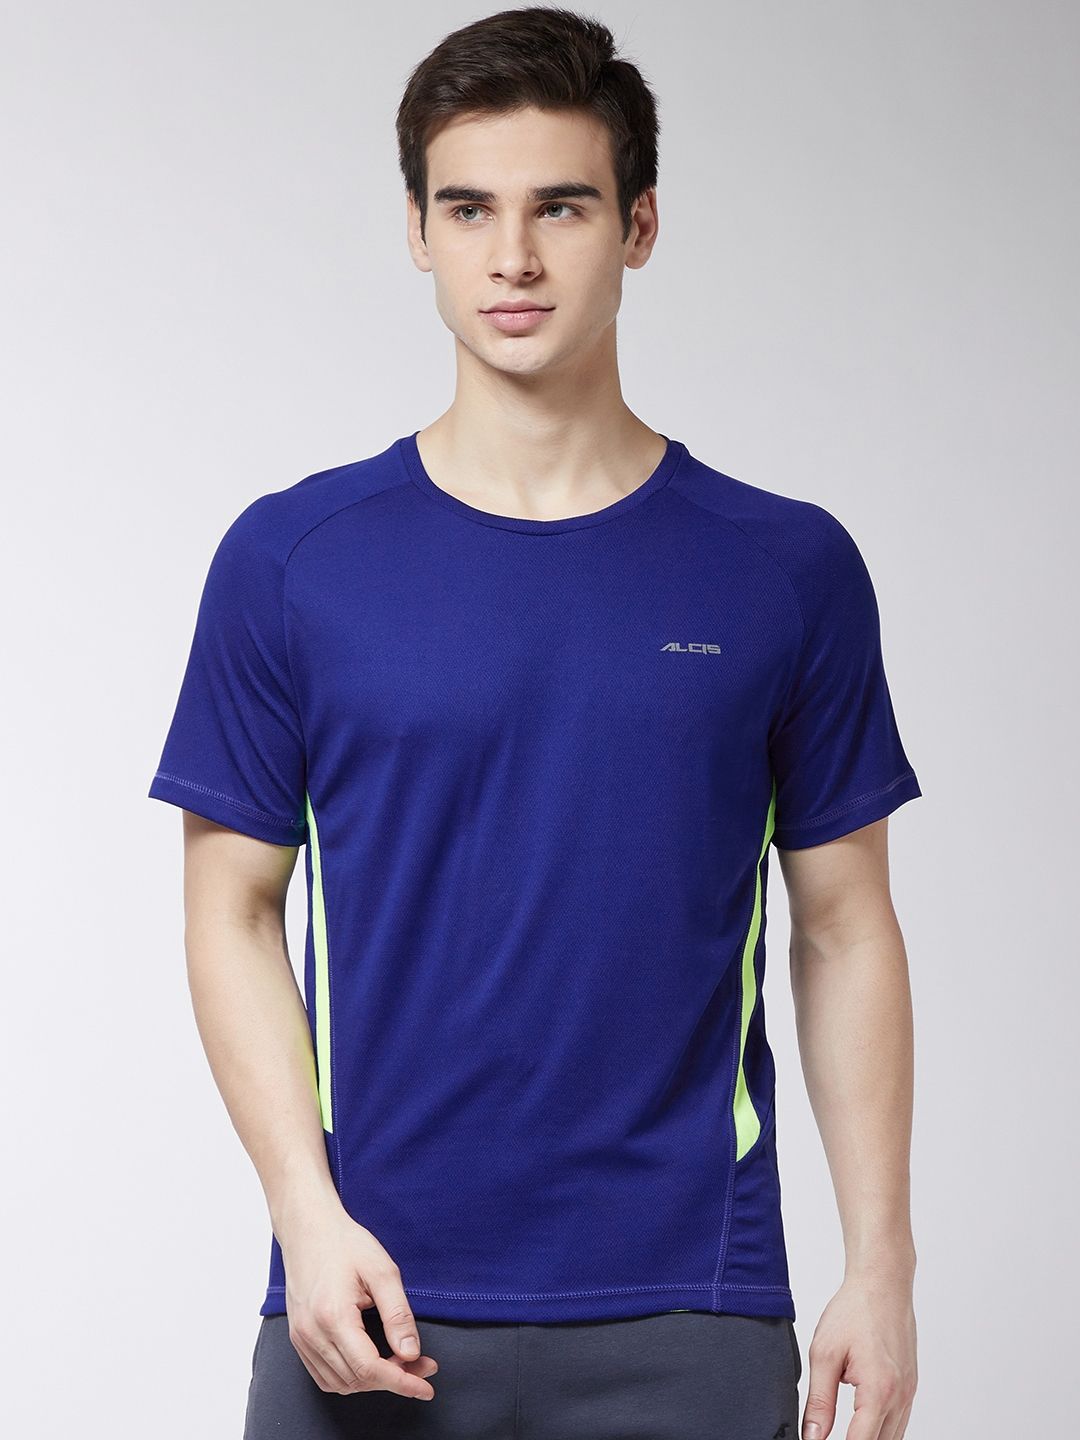 Alcis Blue Polyester T-Shirt Single Pack - Buy Alcis Blue Polyester T ...